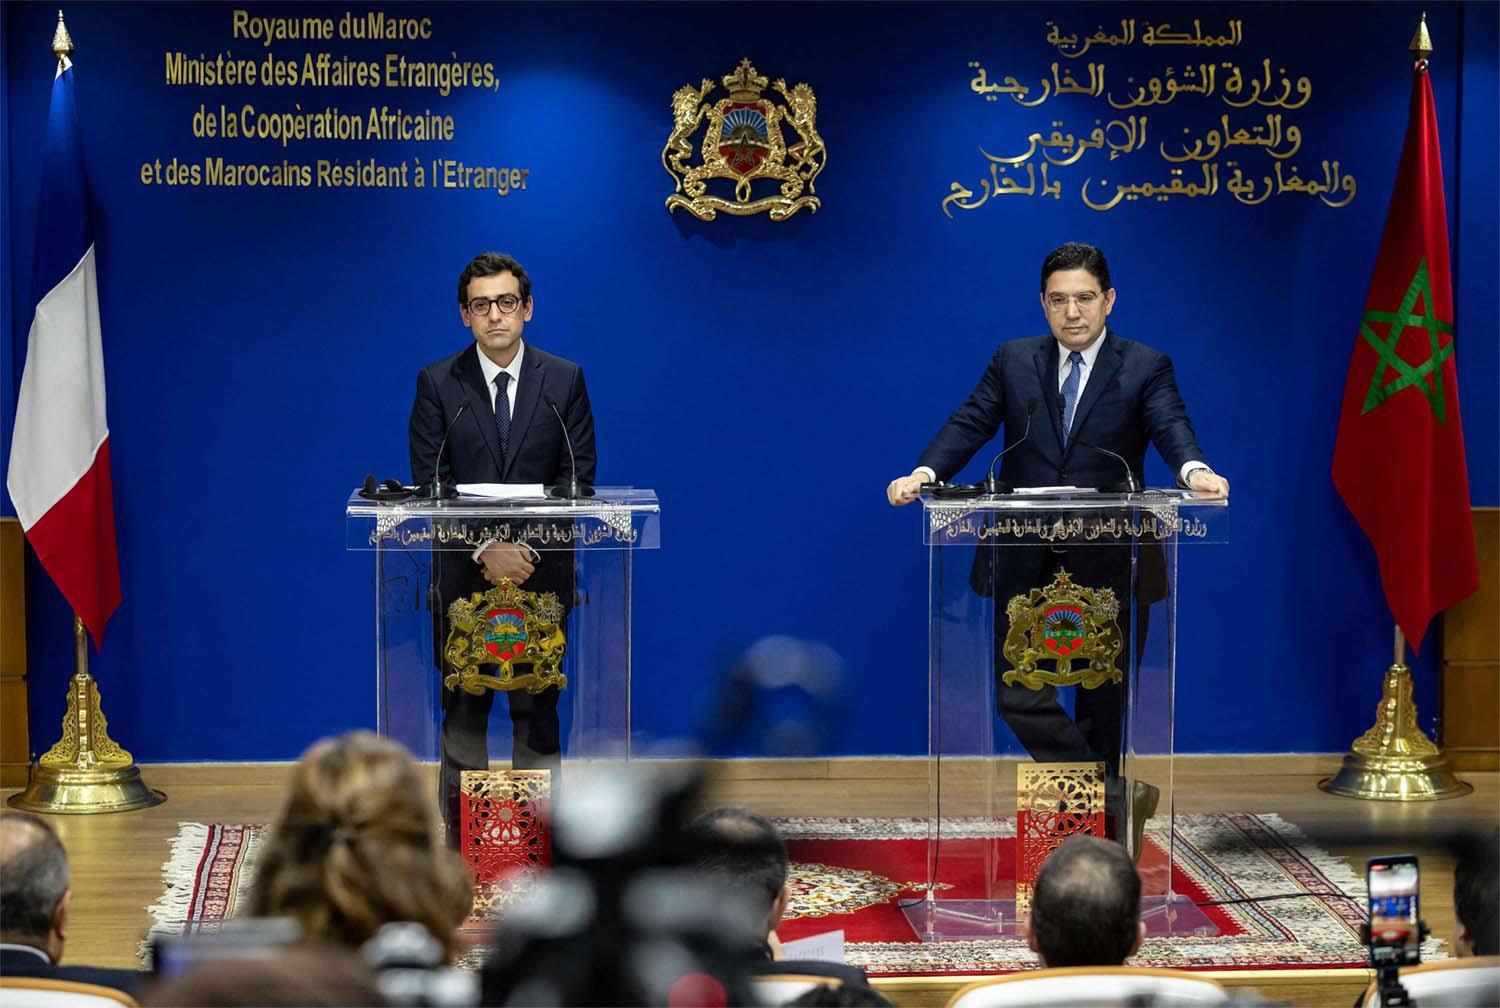 France will support the development of Morocco's southern provinces